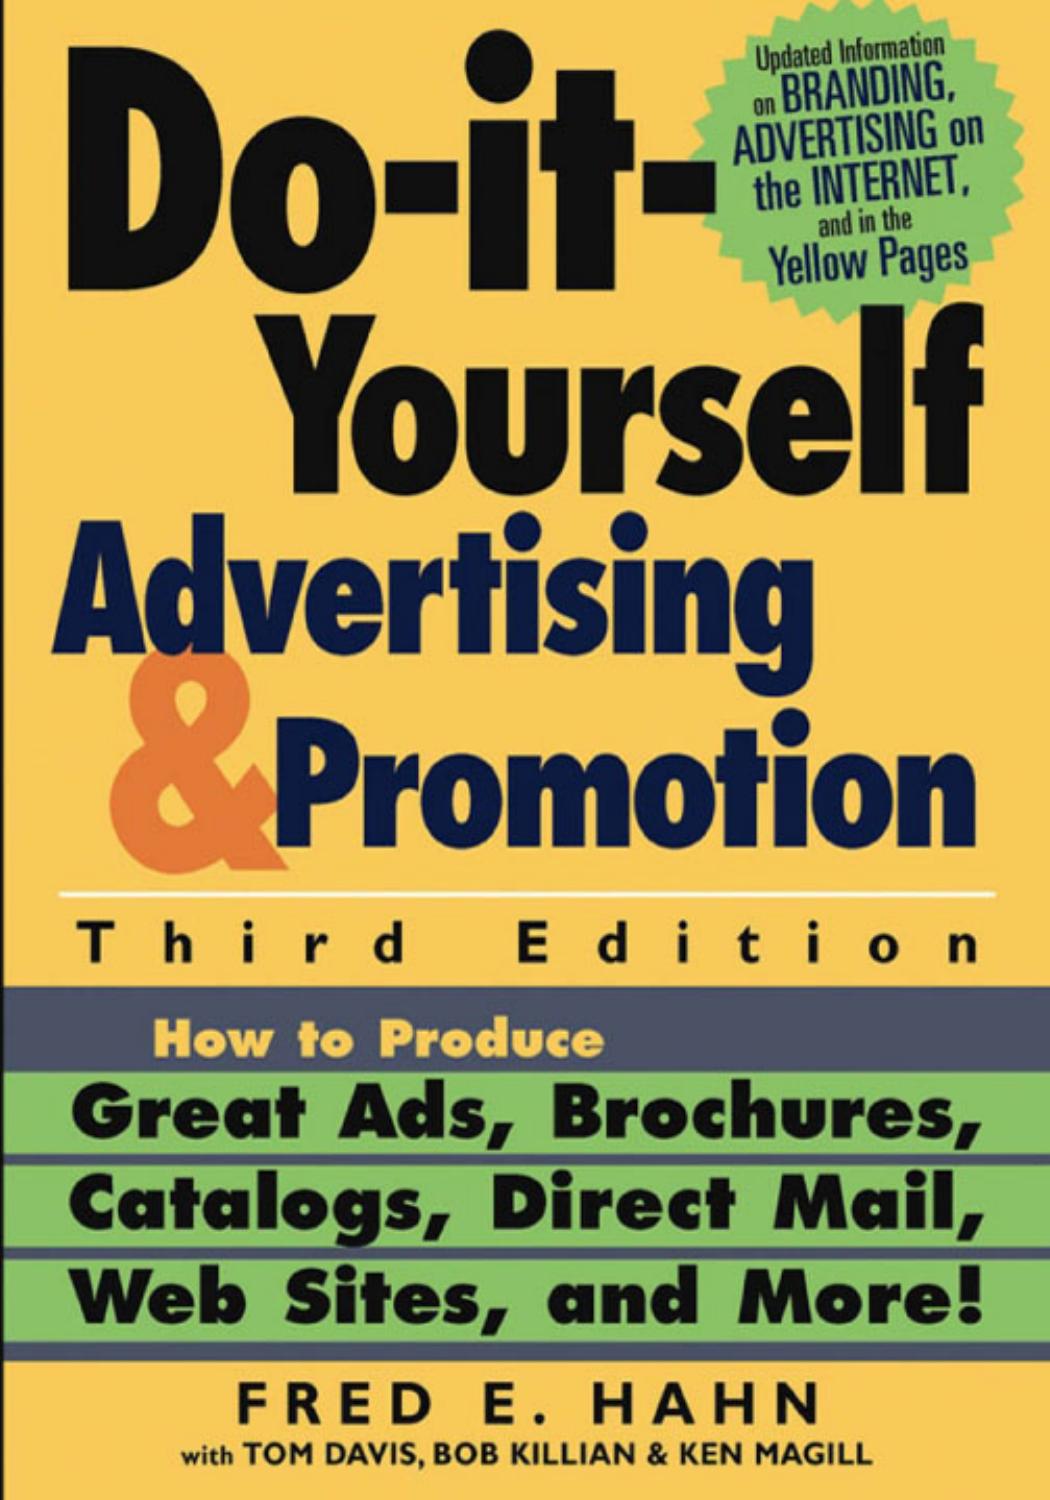 Do-It-Yourself Advertising and Promotion: How to Produce Great Ads, Brochures, Catalogs, Direct Mail, Web Sites, and More, 3rd Edition